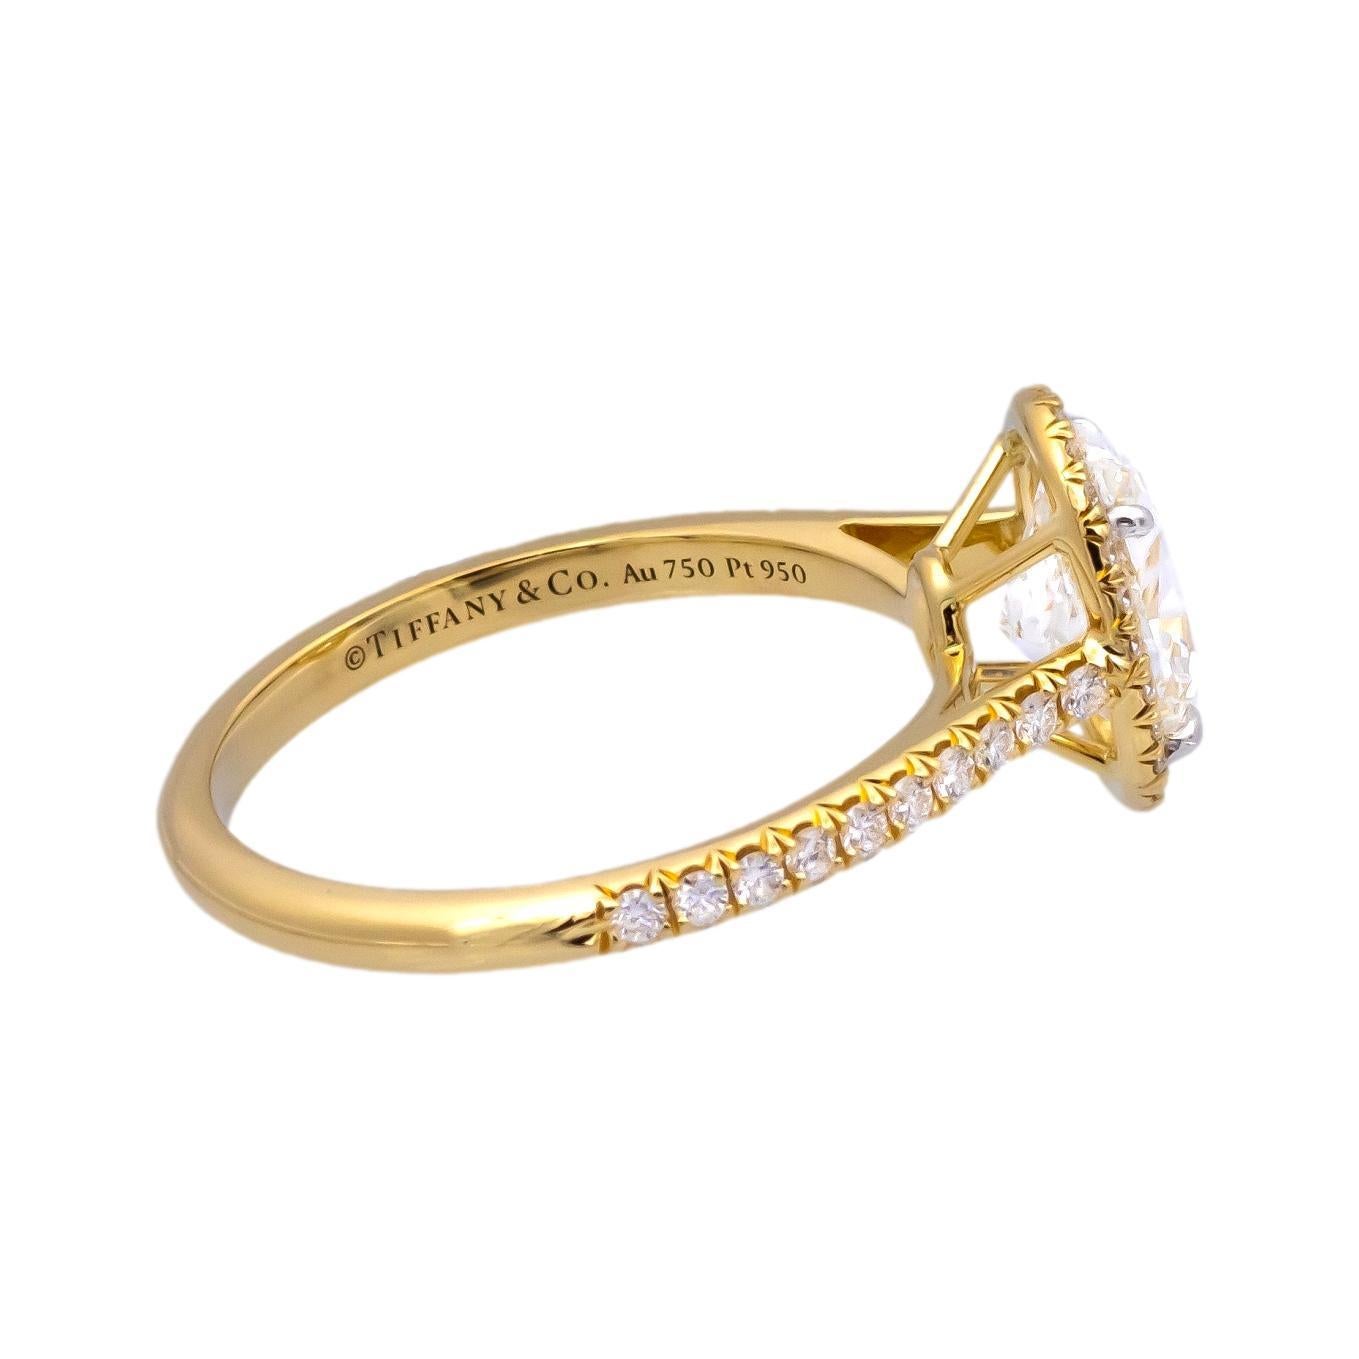 Tiffany & Co. 18K Yellow Gold Oval Diamond Soleste Engagement Ring 2.02ctTW FVS1 1